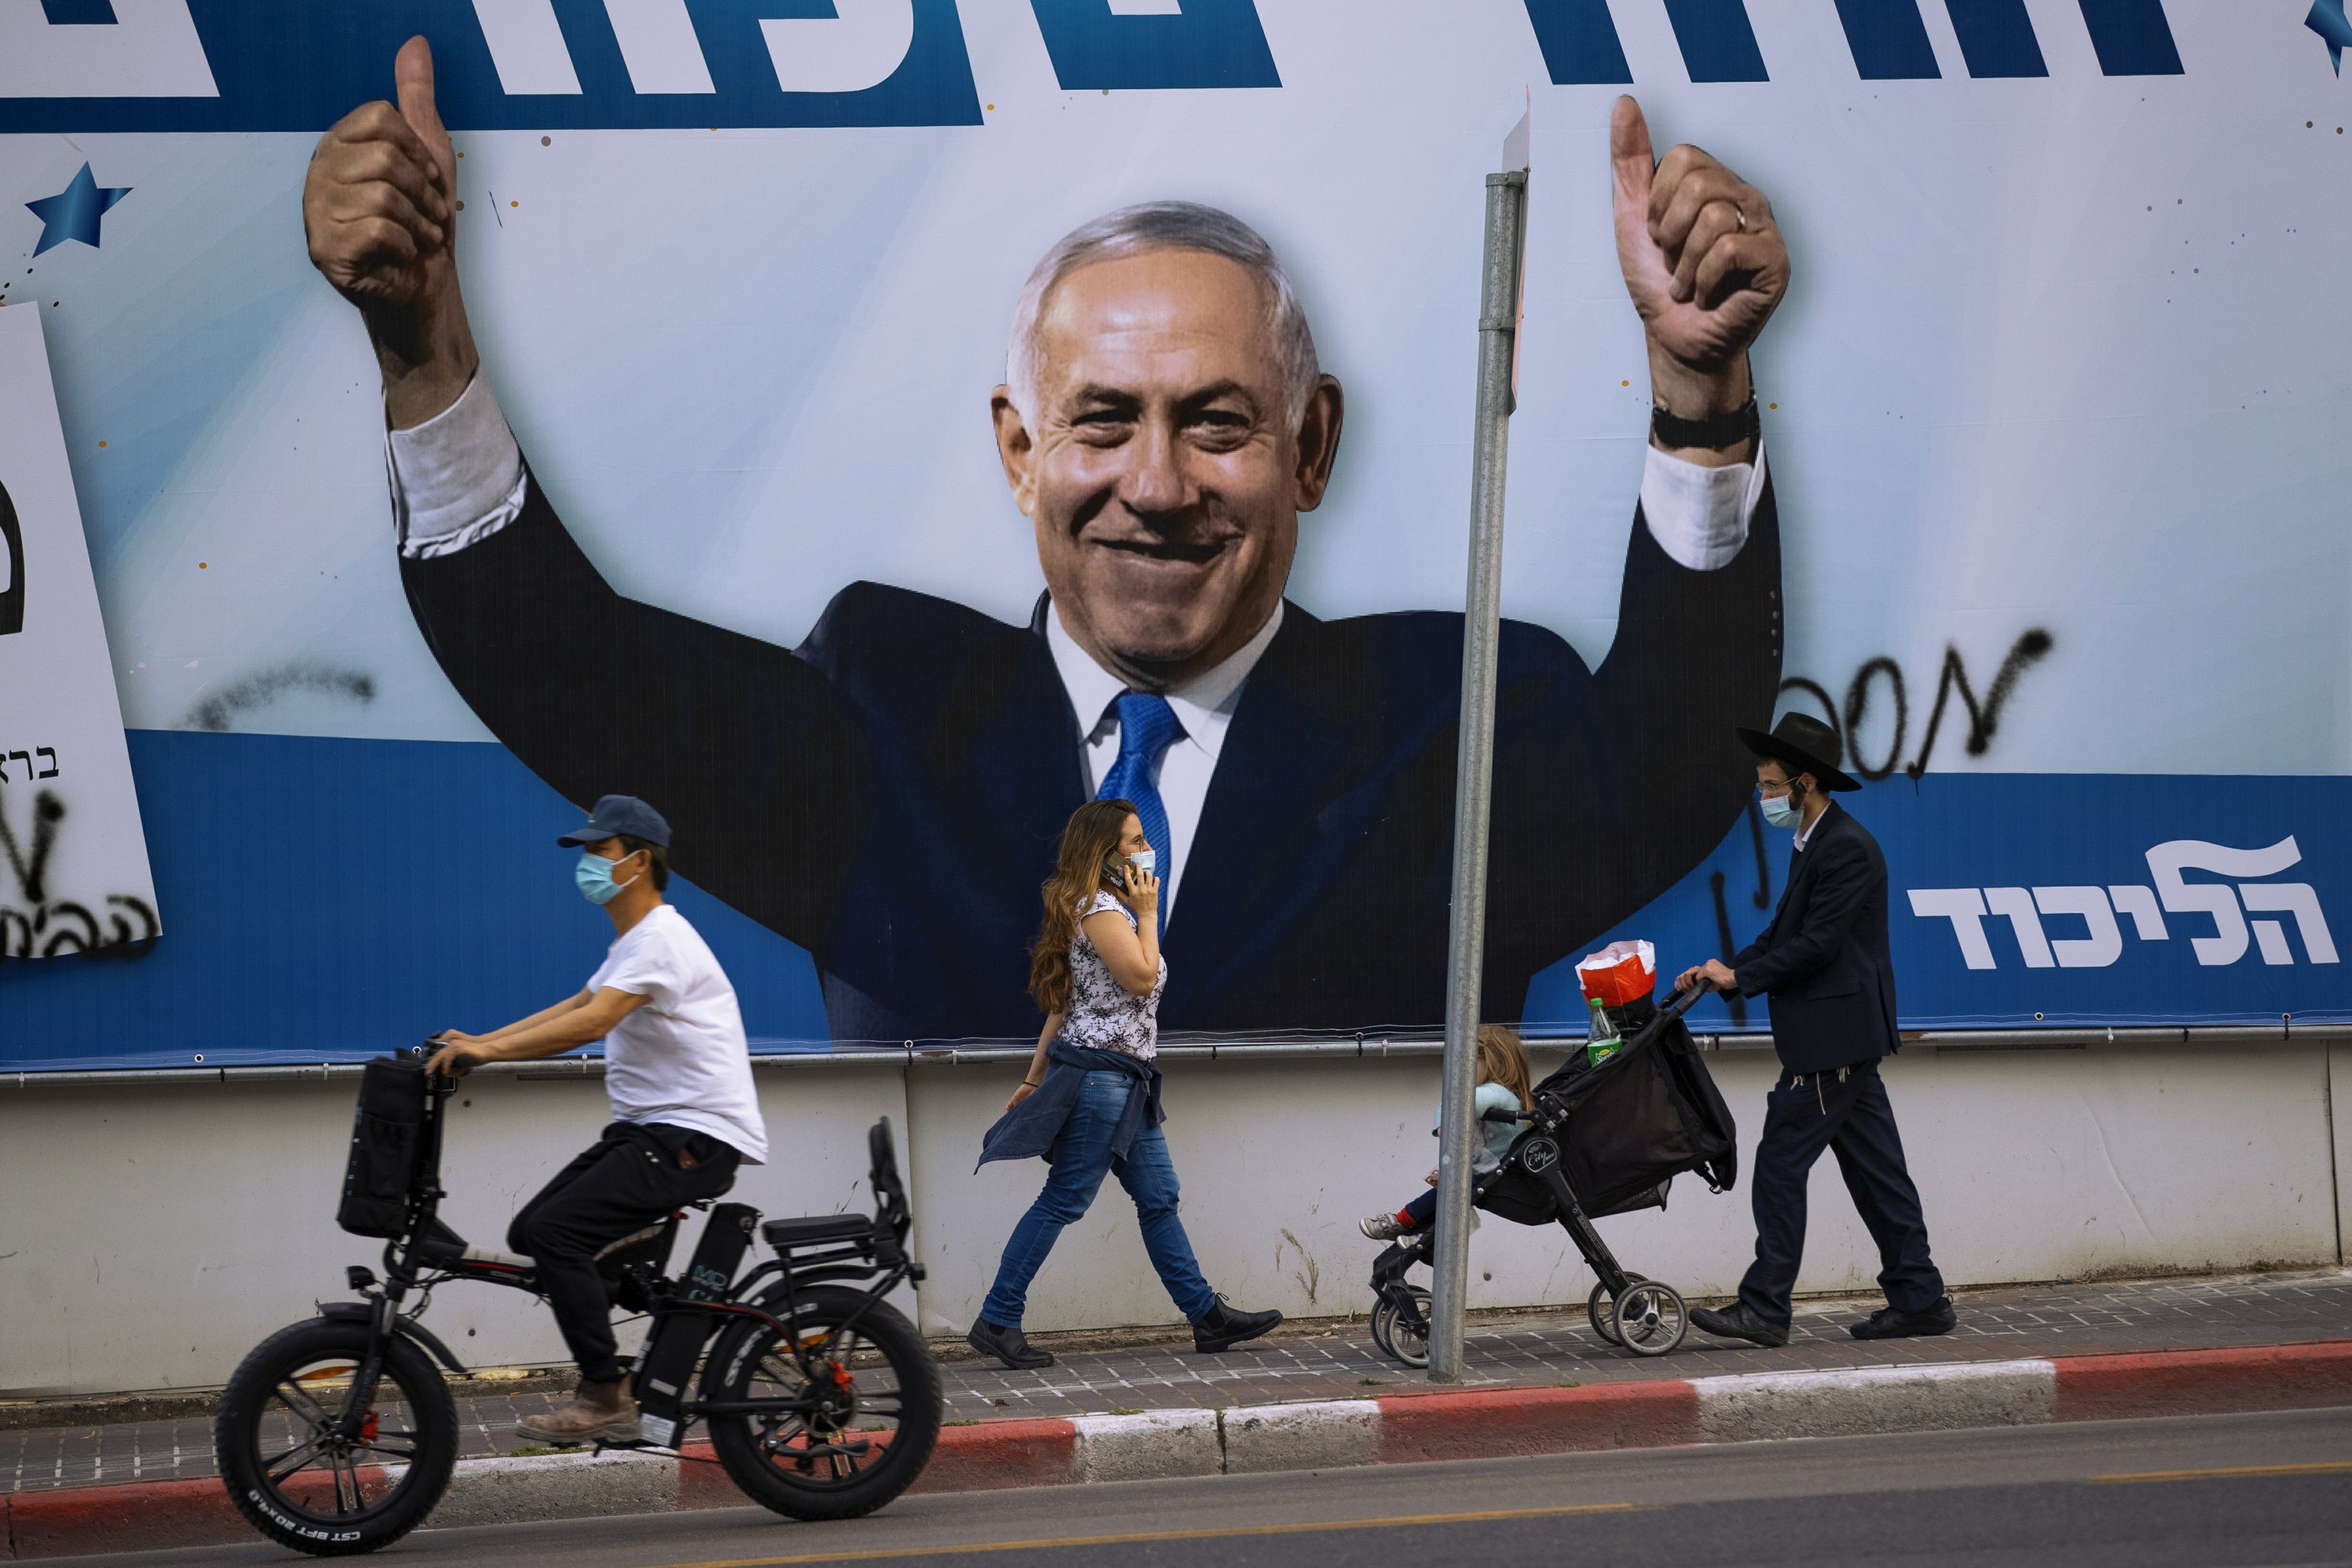 The Israeli election is seen as a referendum on the divisive Netanyahu